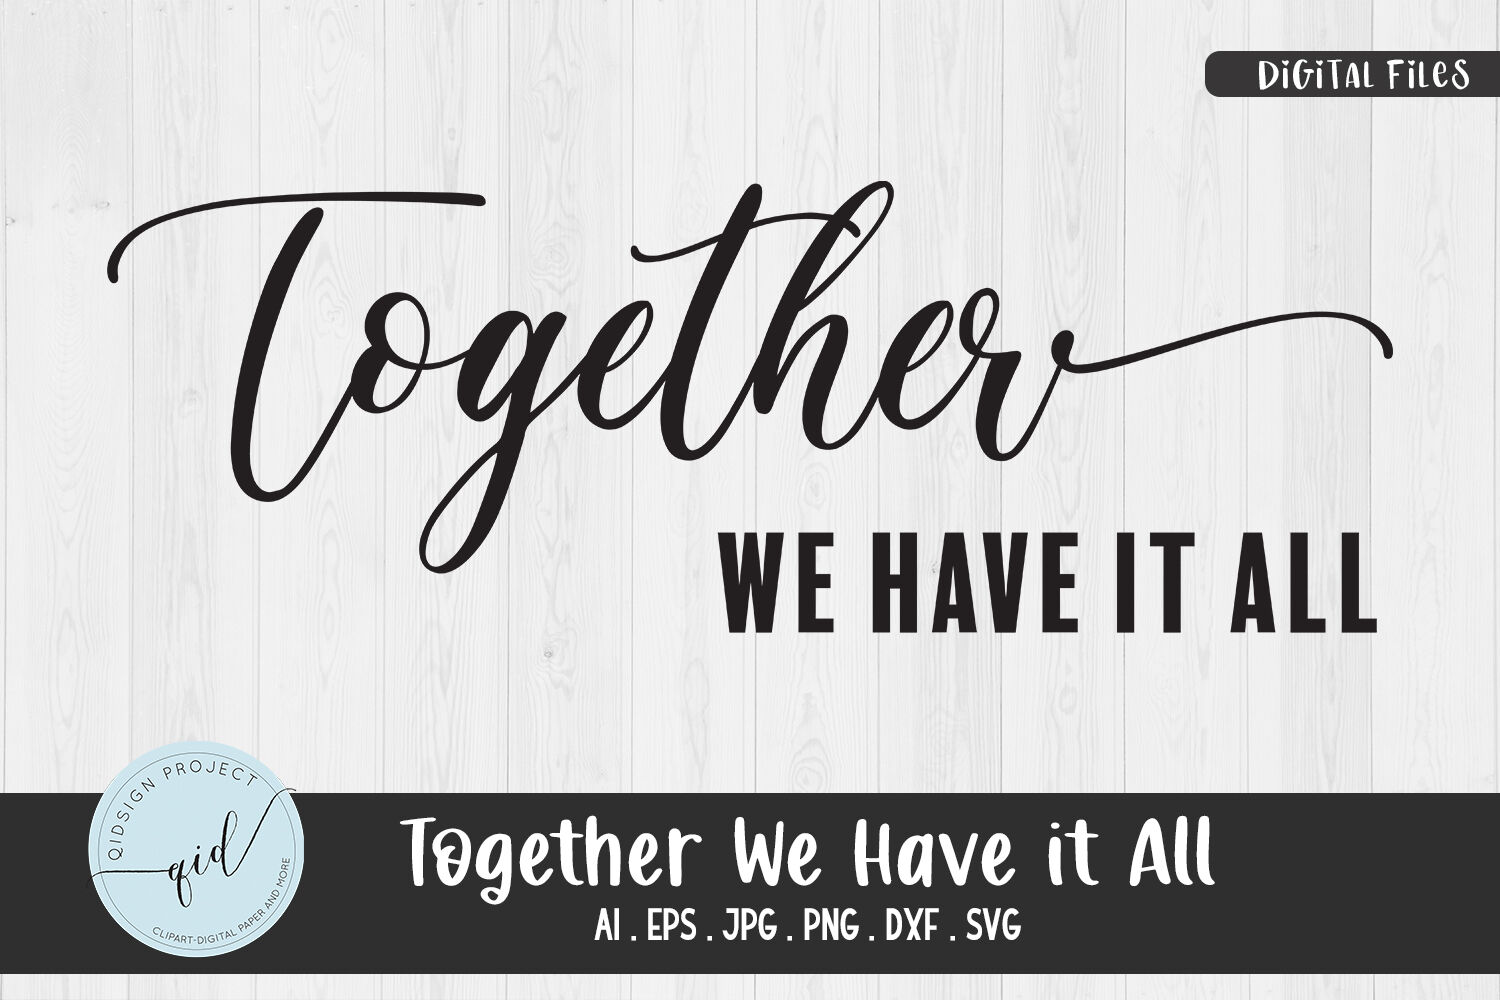 Together We Have it All, Phrases svg By qidsign project | TheHungryJPEG